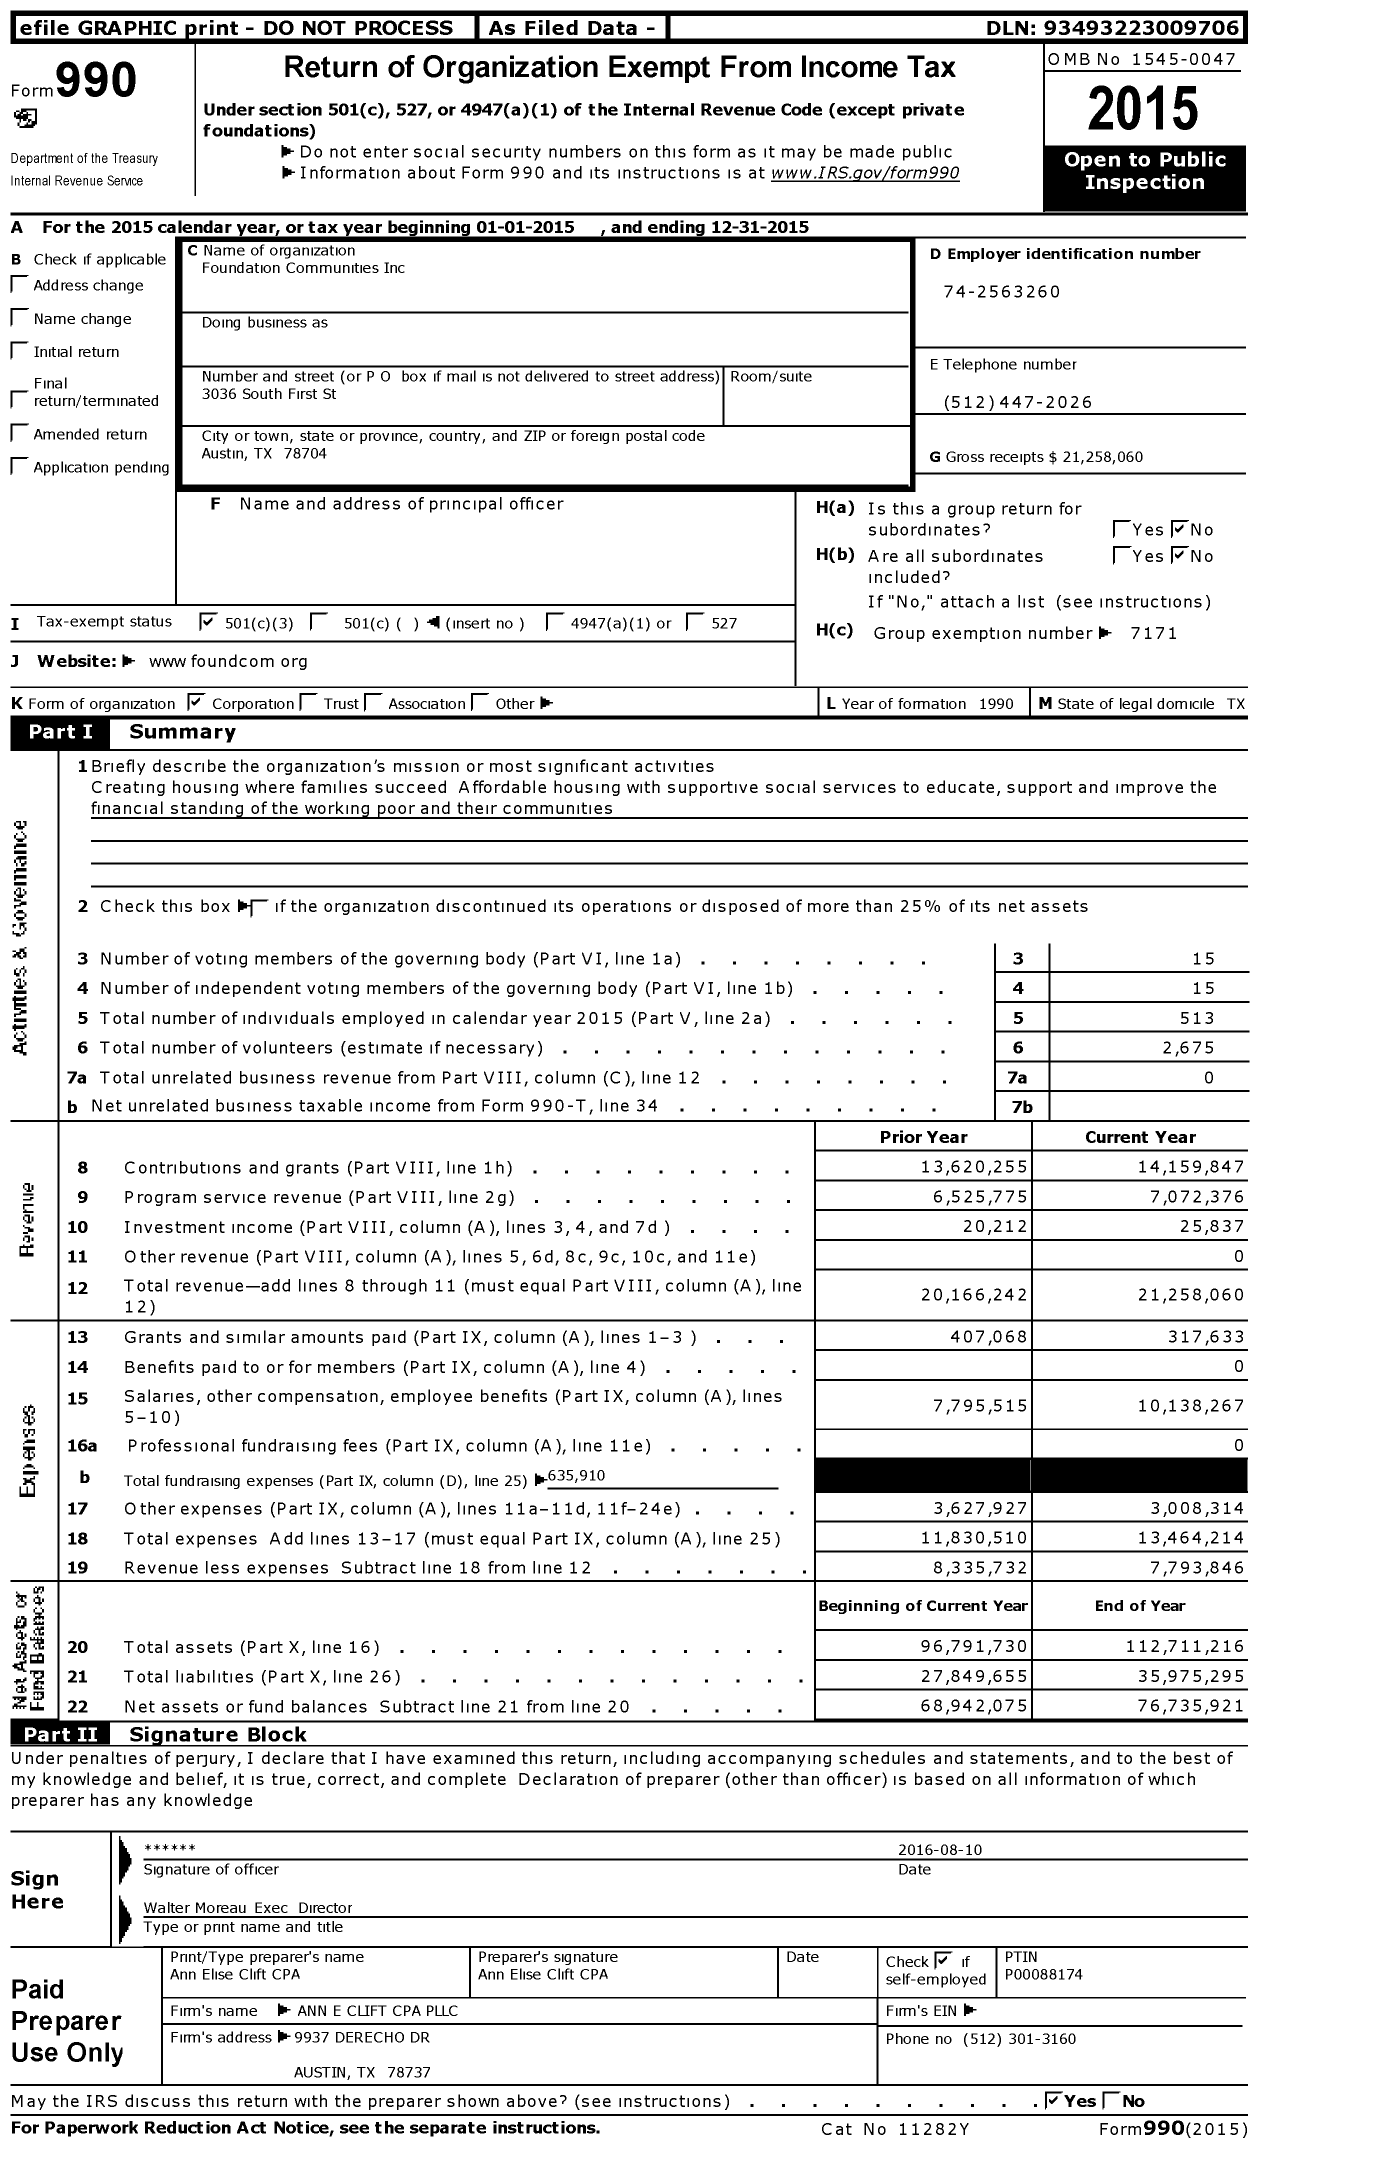 Image of first page of 2015 Form 990 for Foundation Communities